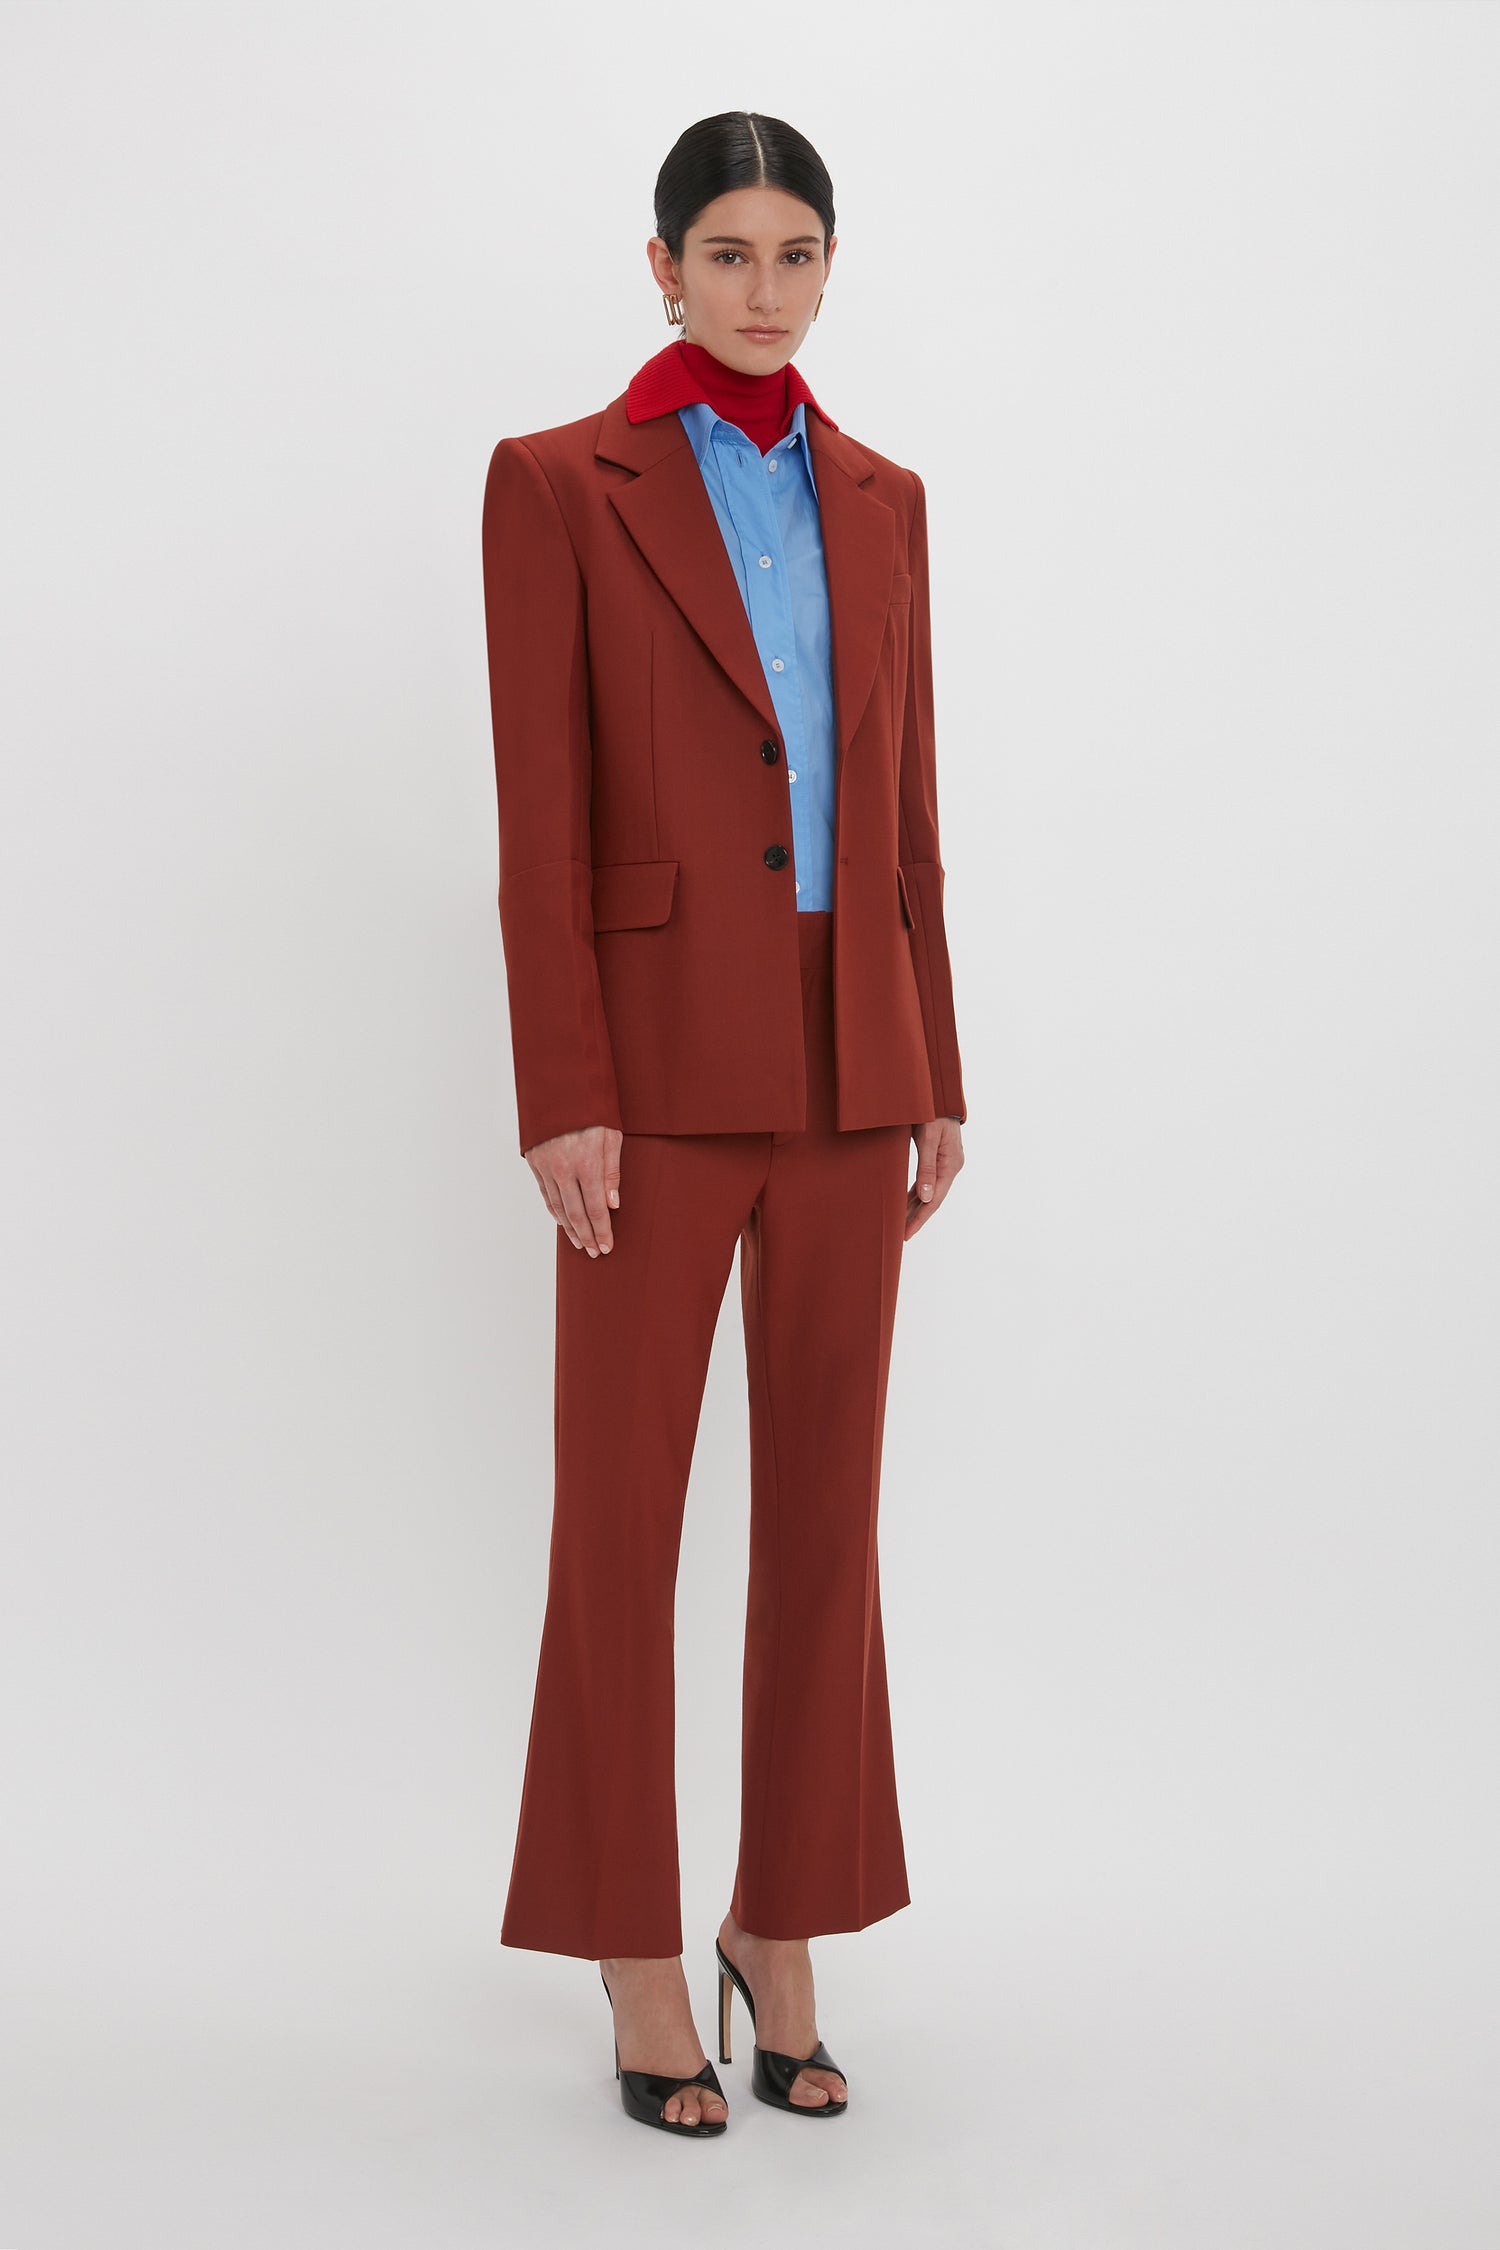 Person wearing a Victoria Beckham Wide Cropped Flare Trouser in Russet with 1970s-inspired trousers, paired with a blue shirt and red scarf, standing against a plain white background.